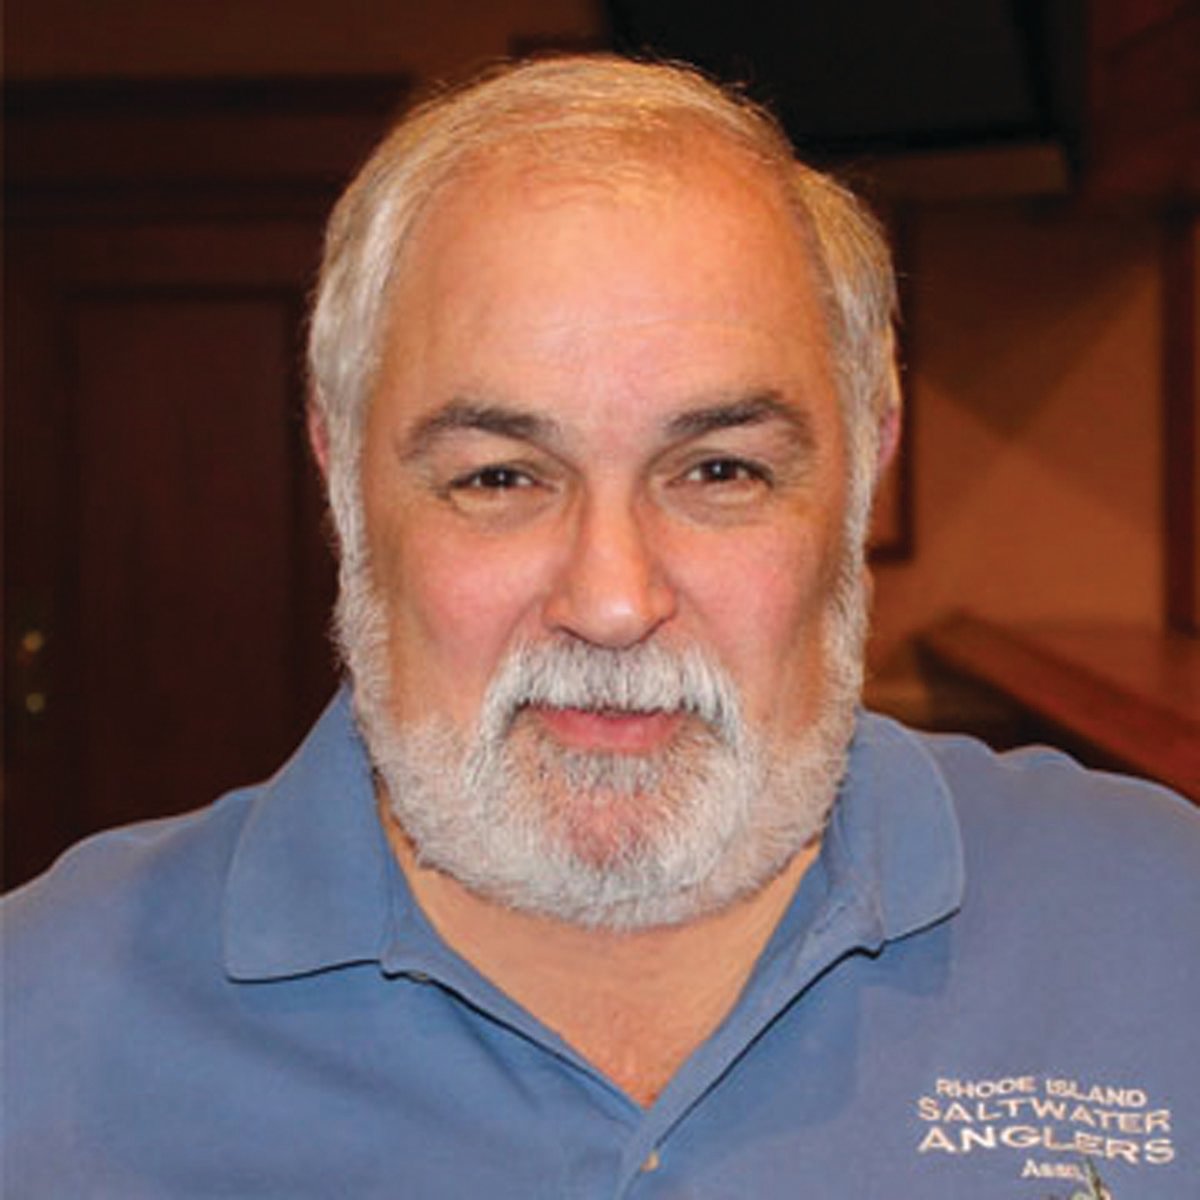 Stephen J. Medeiros, founder, president and executive direction of the RI Saltwater Anglers Association, passed away Monday, September 13.